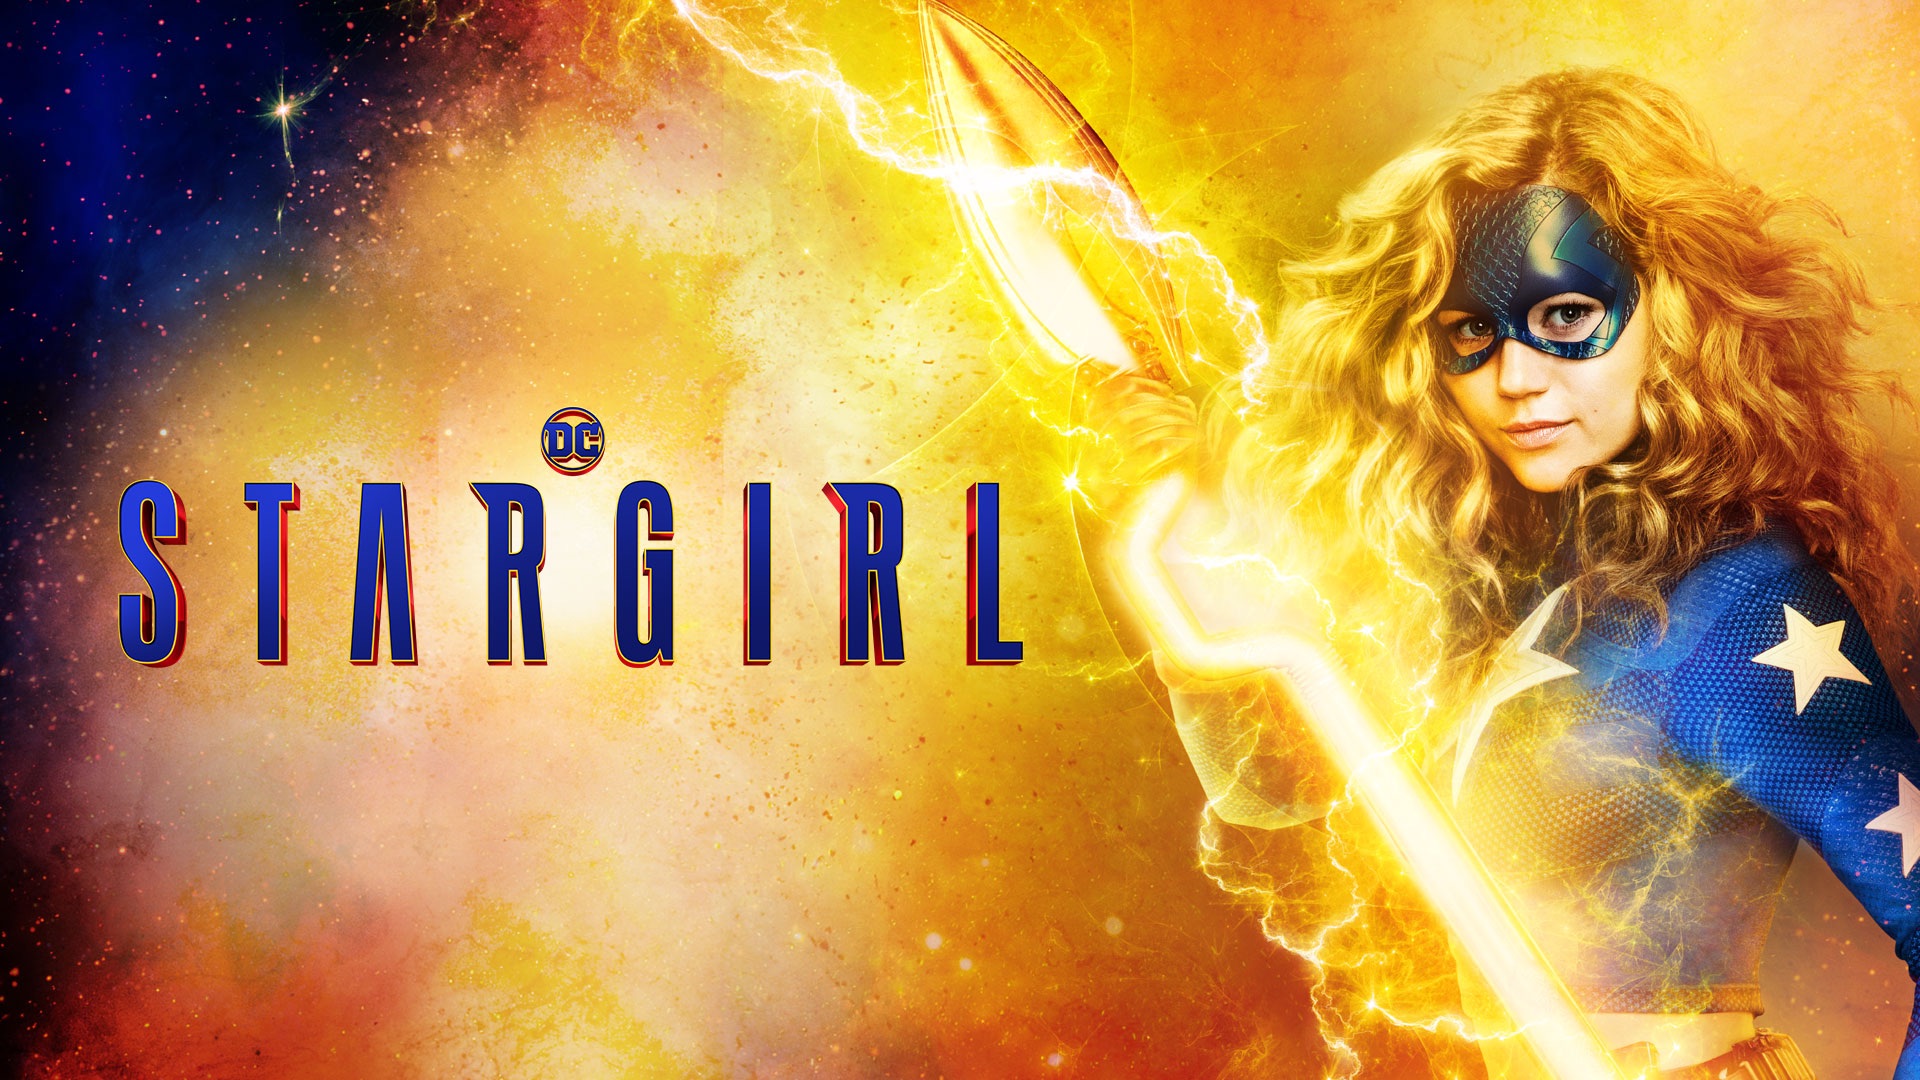 Stargirl (DC Comics) HD Wallpapers and Backgrounds. 